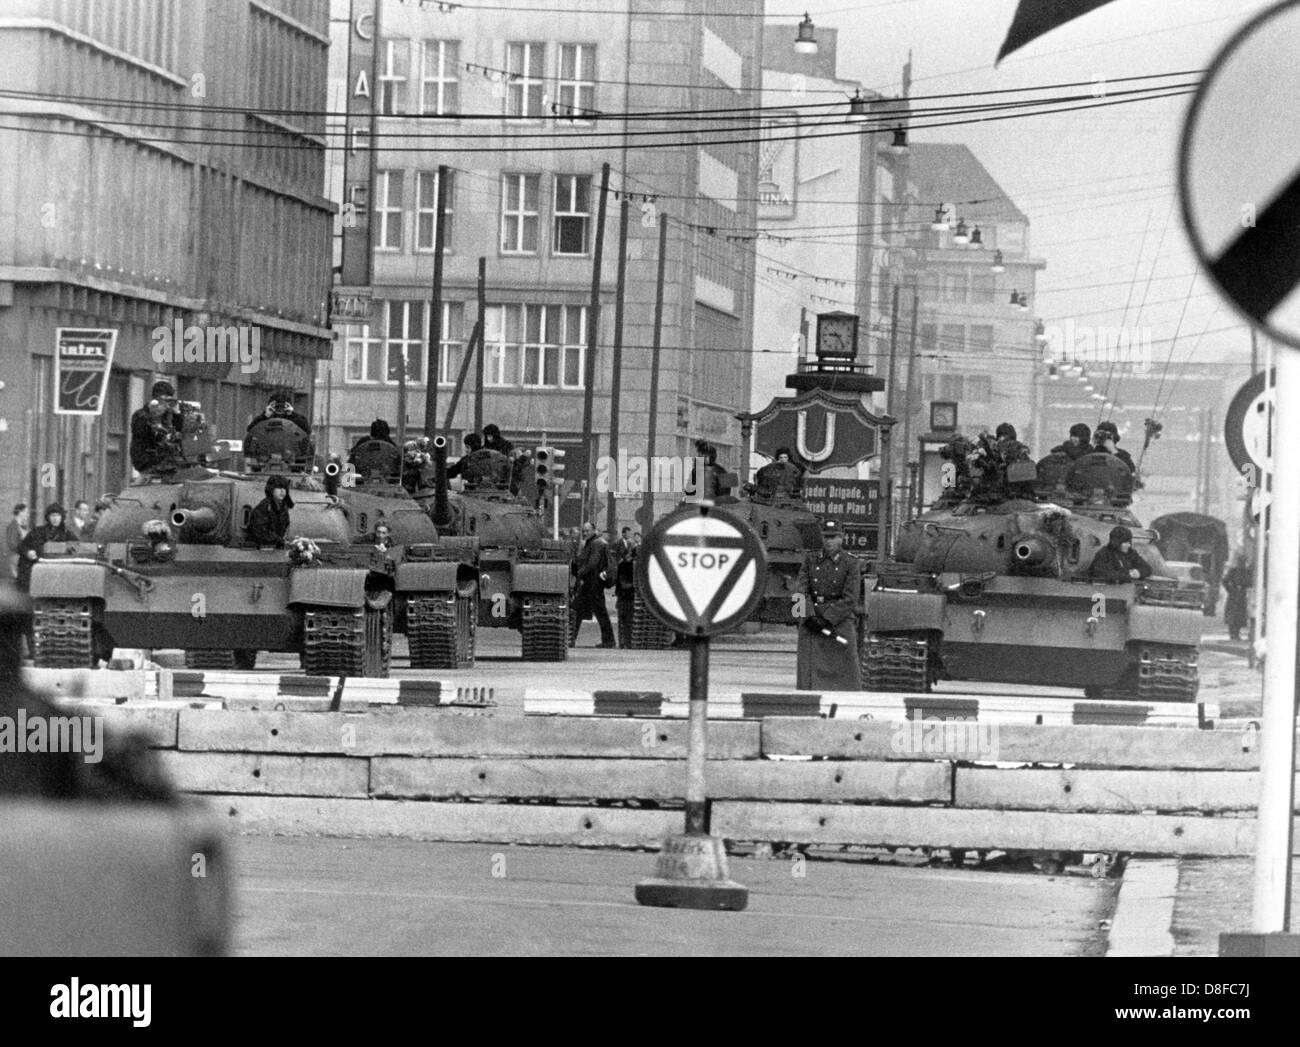 Soviet tanks aiming on West Berlin pictured at broder crossing Friedrich street in East Berlin, GDR, 28 October 1961. Soviet authorities had barred forcibly the Berlin borders resulting in a face-off of U.S and Soviet tanks. Stock Photo